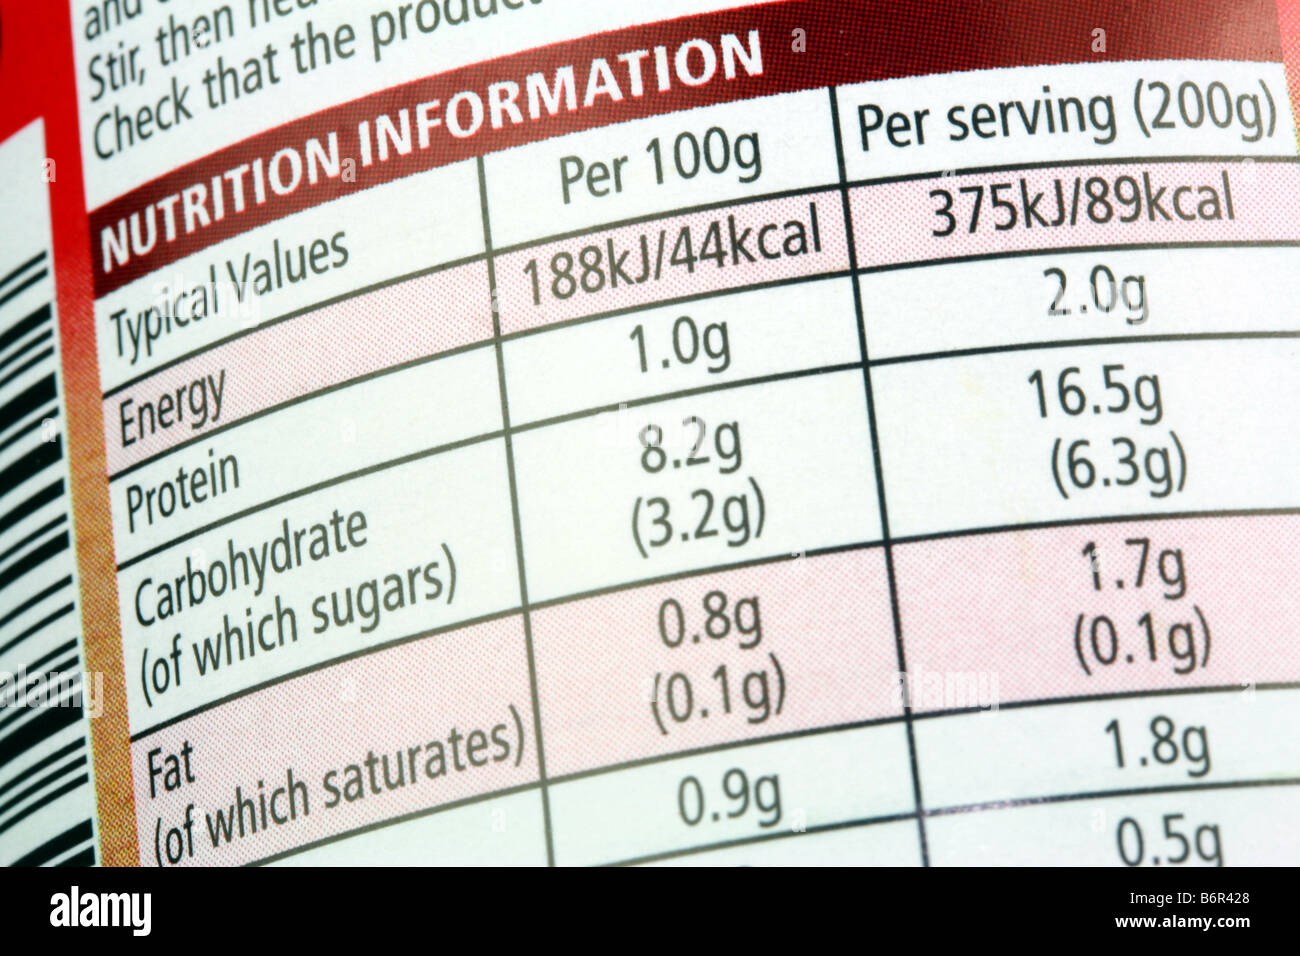 Nutrition Information printed on packaging label of tinned food Stock Photo